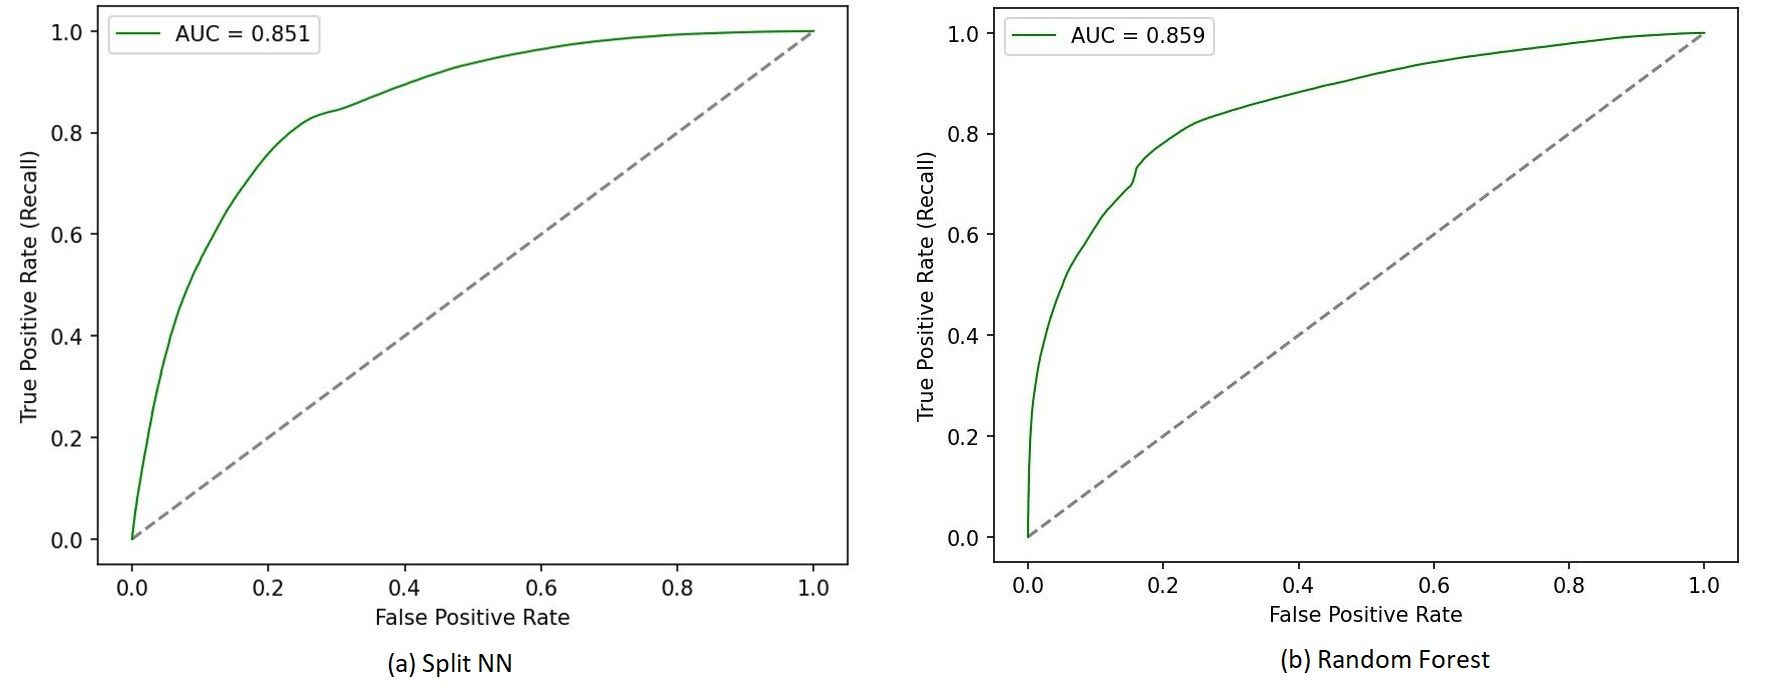 Fig 6: Comparison of ROC curves of models for cycle 2